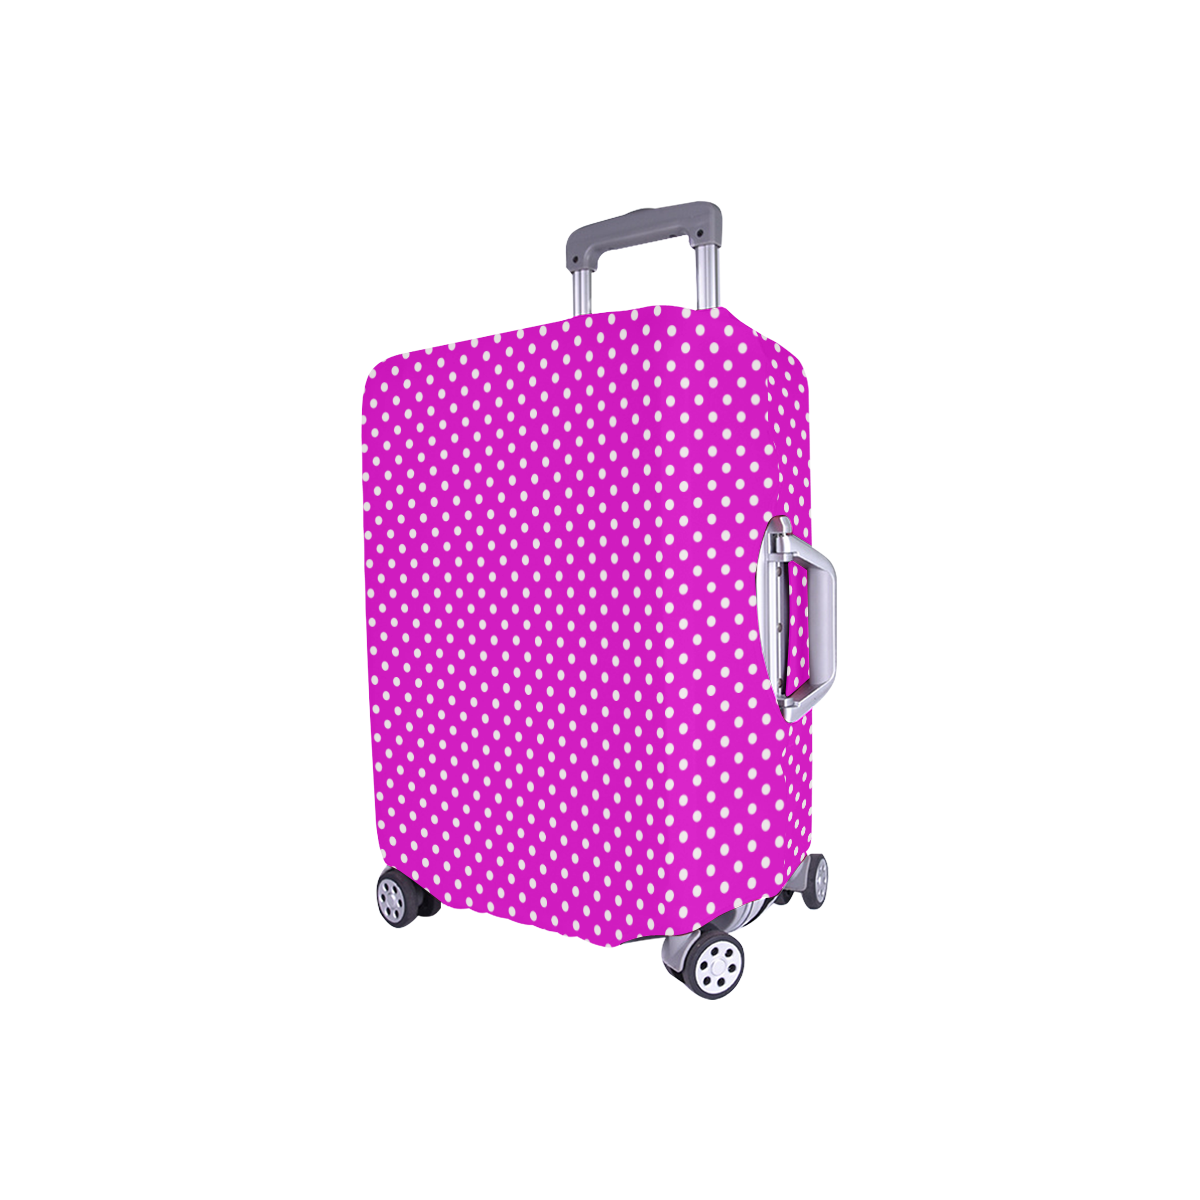 Pink polka dots Luggage Cover/Small 18"-21"